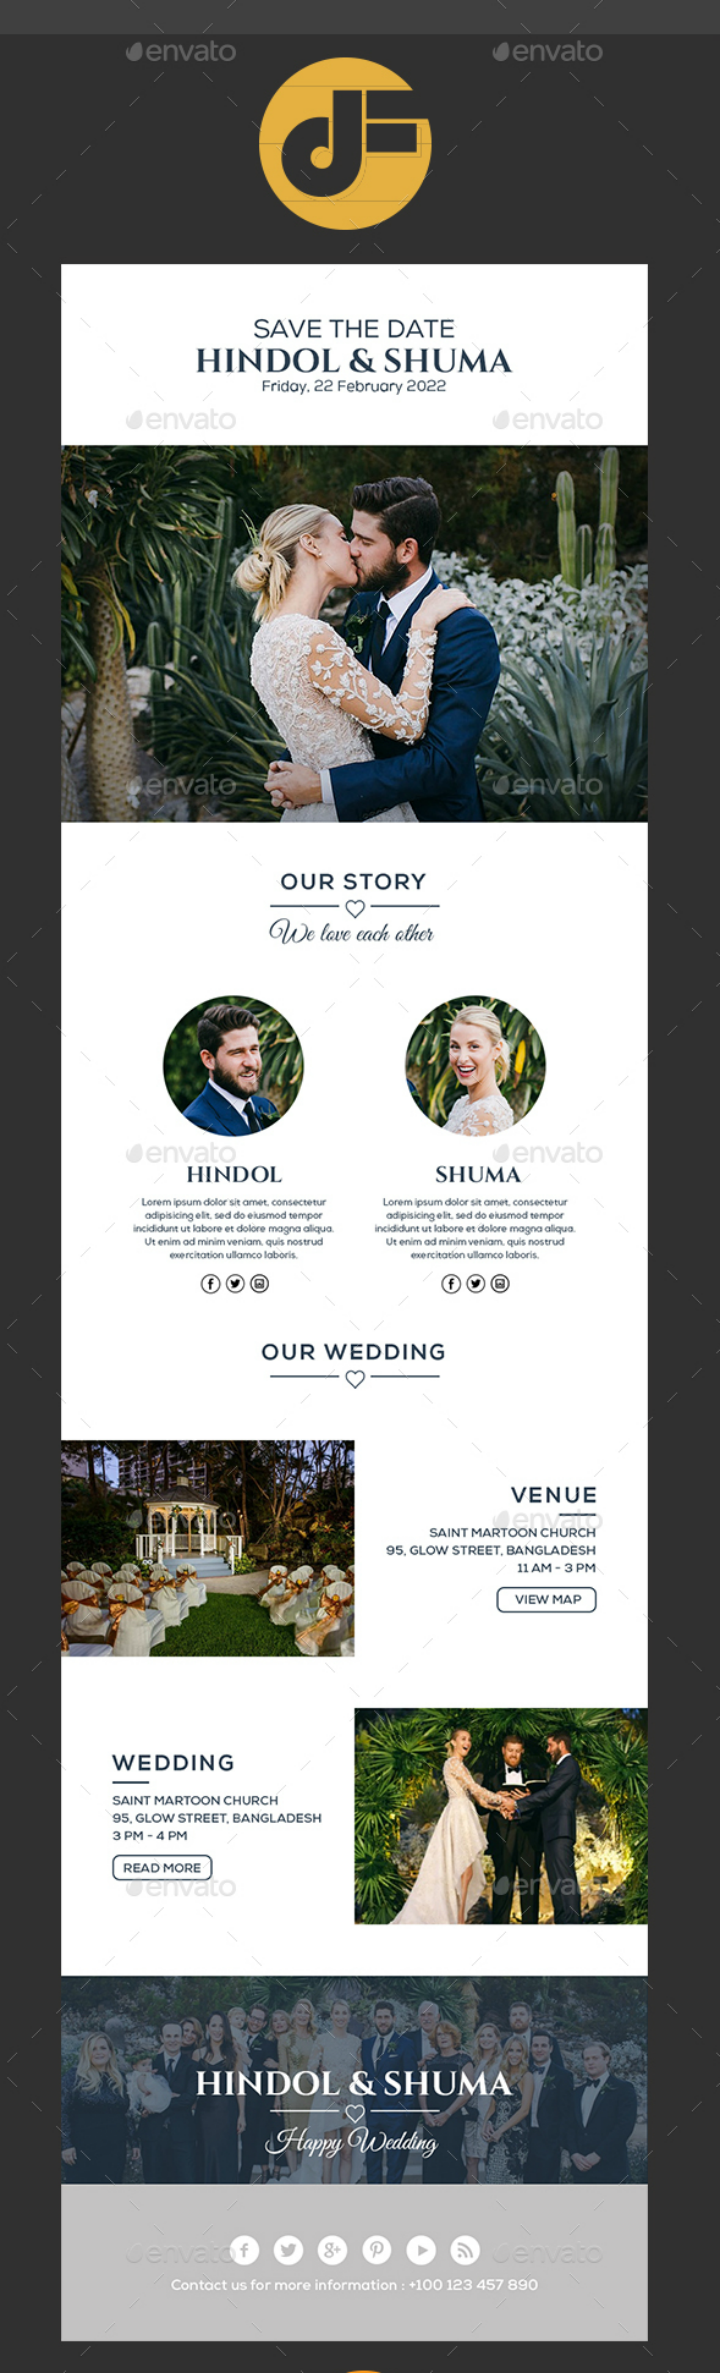 classic-wedding-invitation-email-template